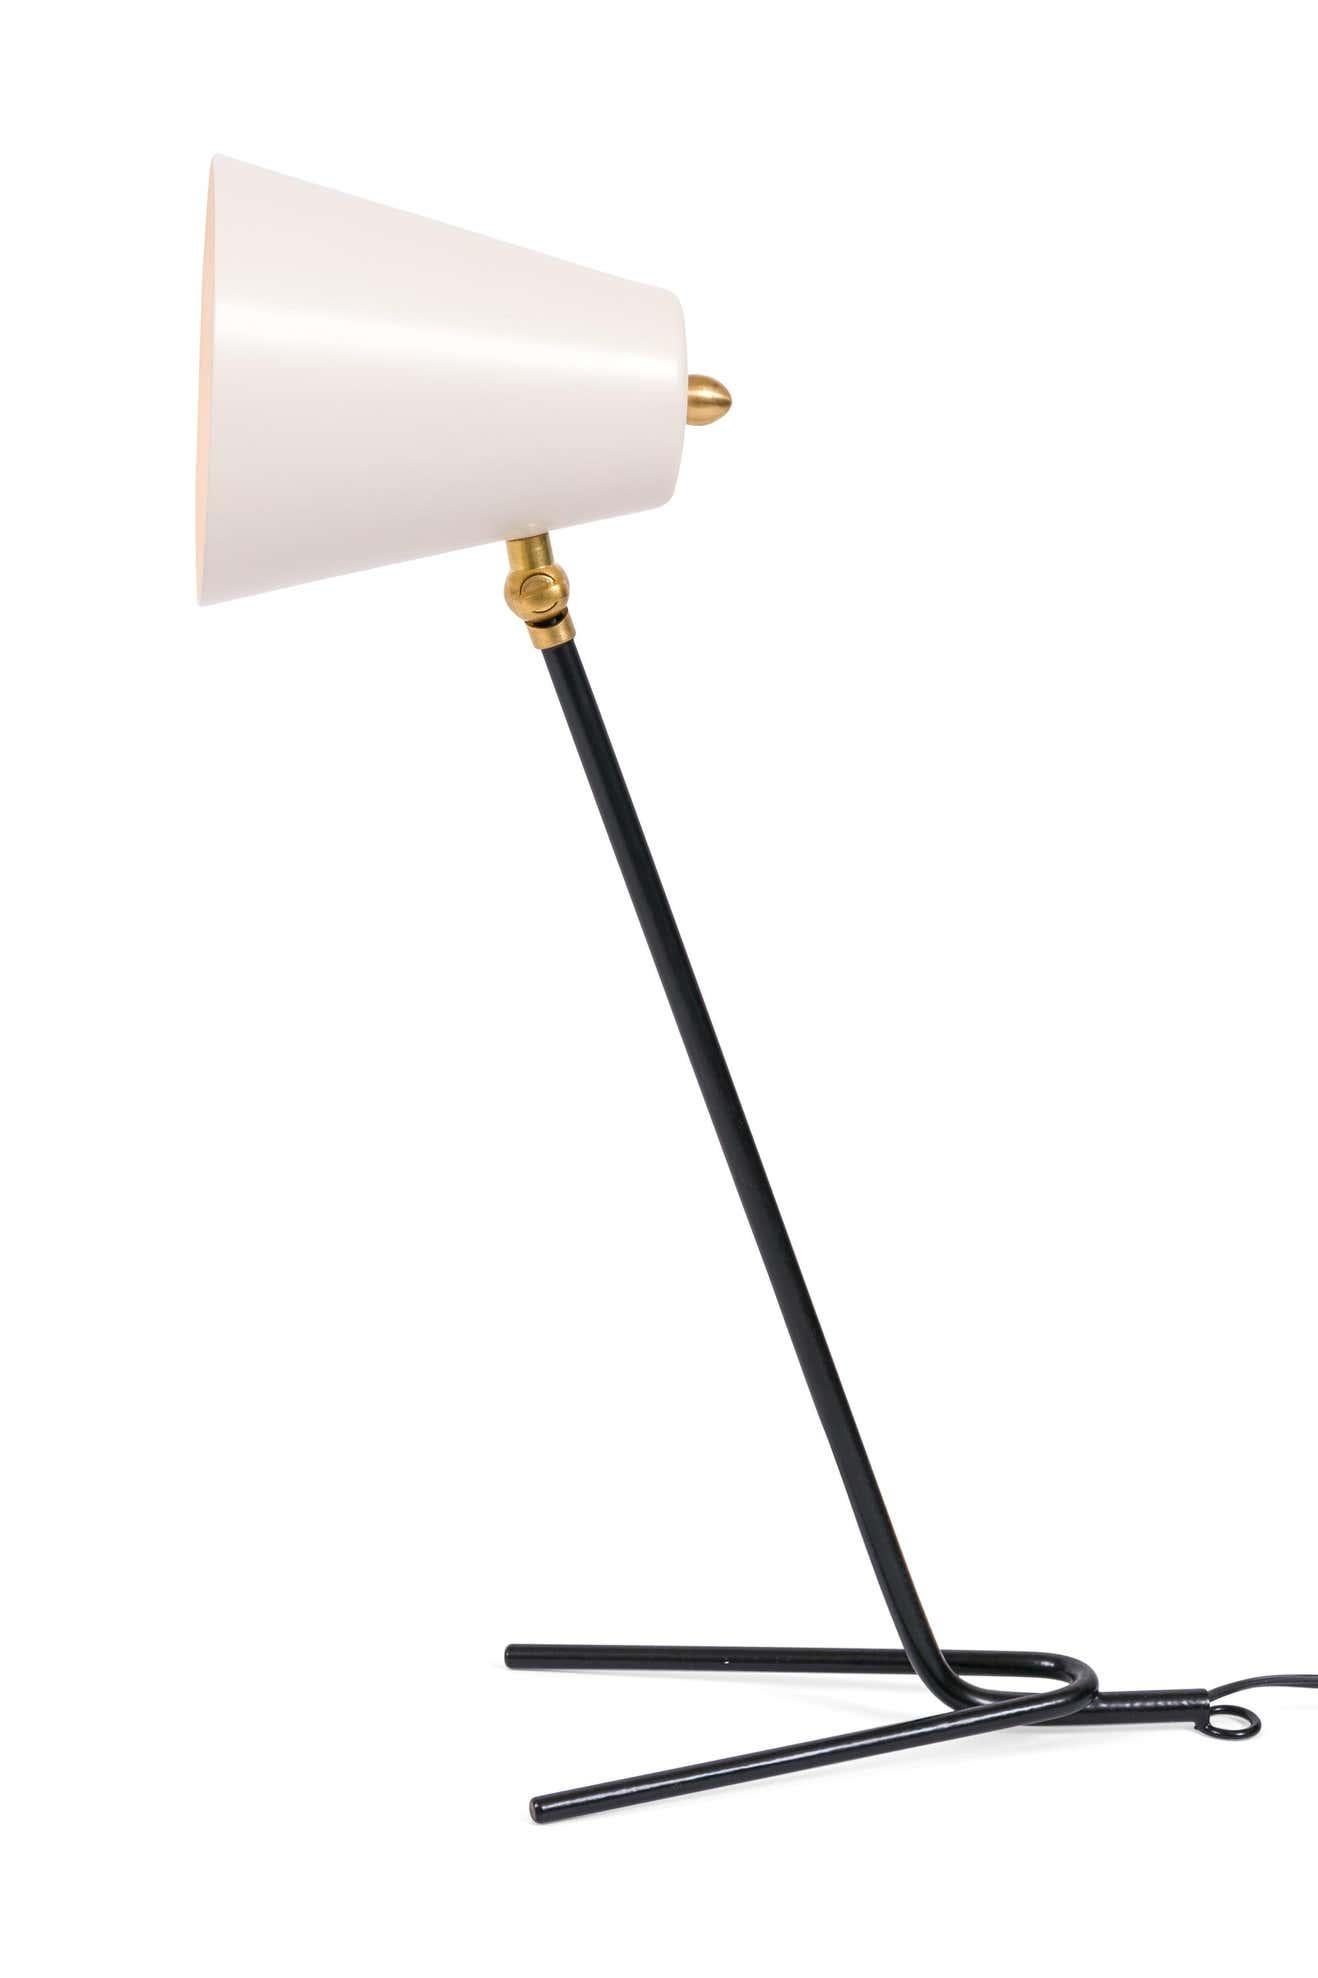 Made in Italy this desk lamp has the look of the period versions at a fraction of the cost.